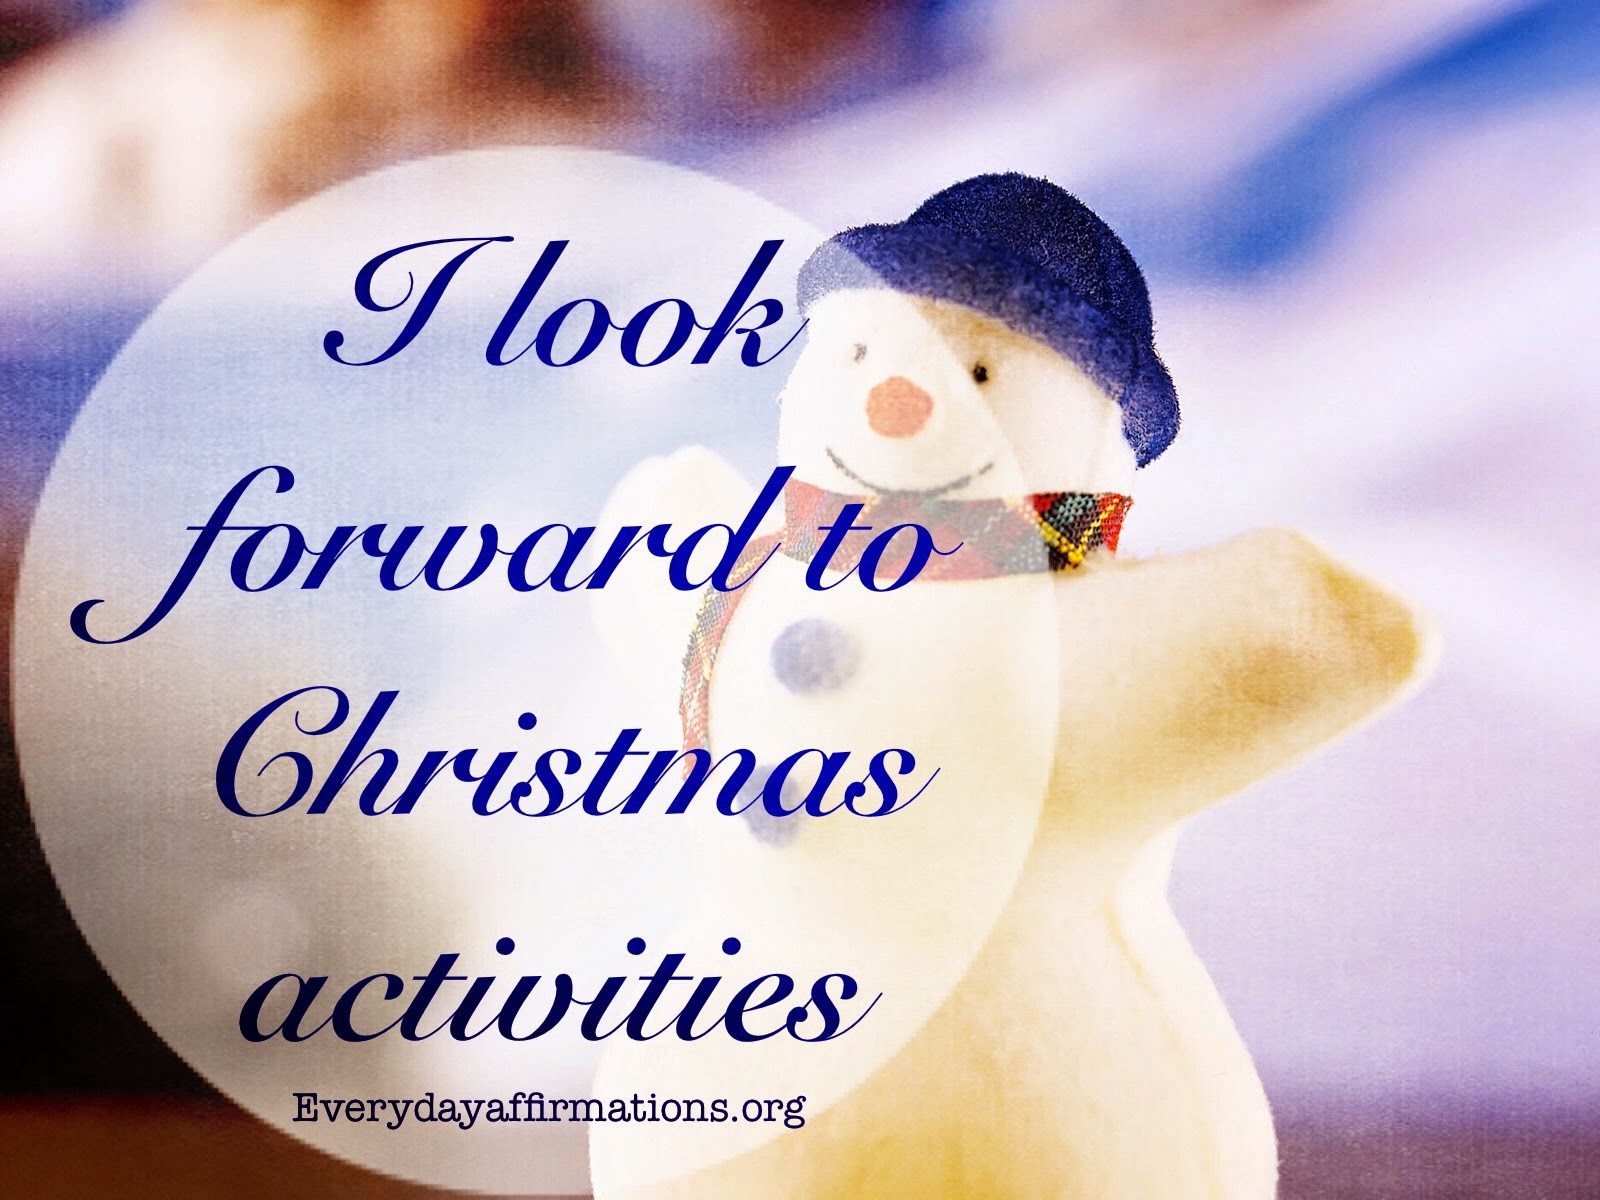 Daily Affirmations, Christmas Affirmations, newyear affirmations